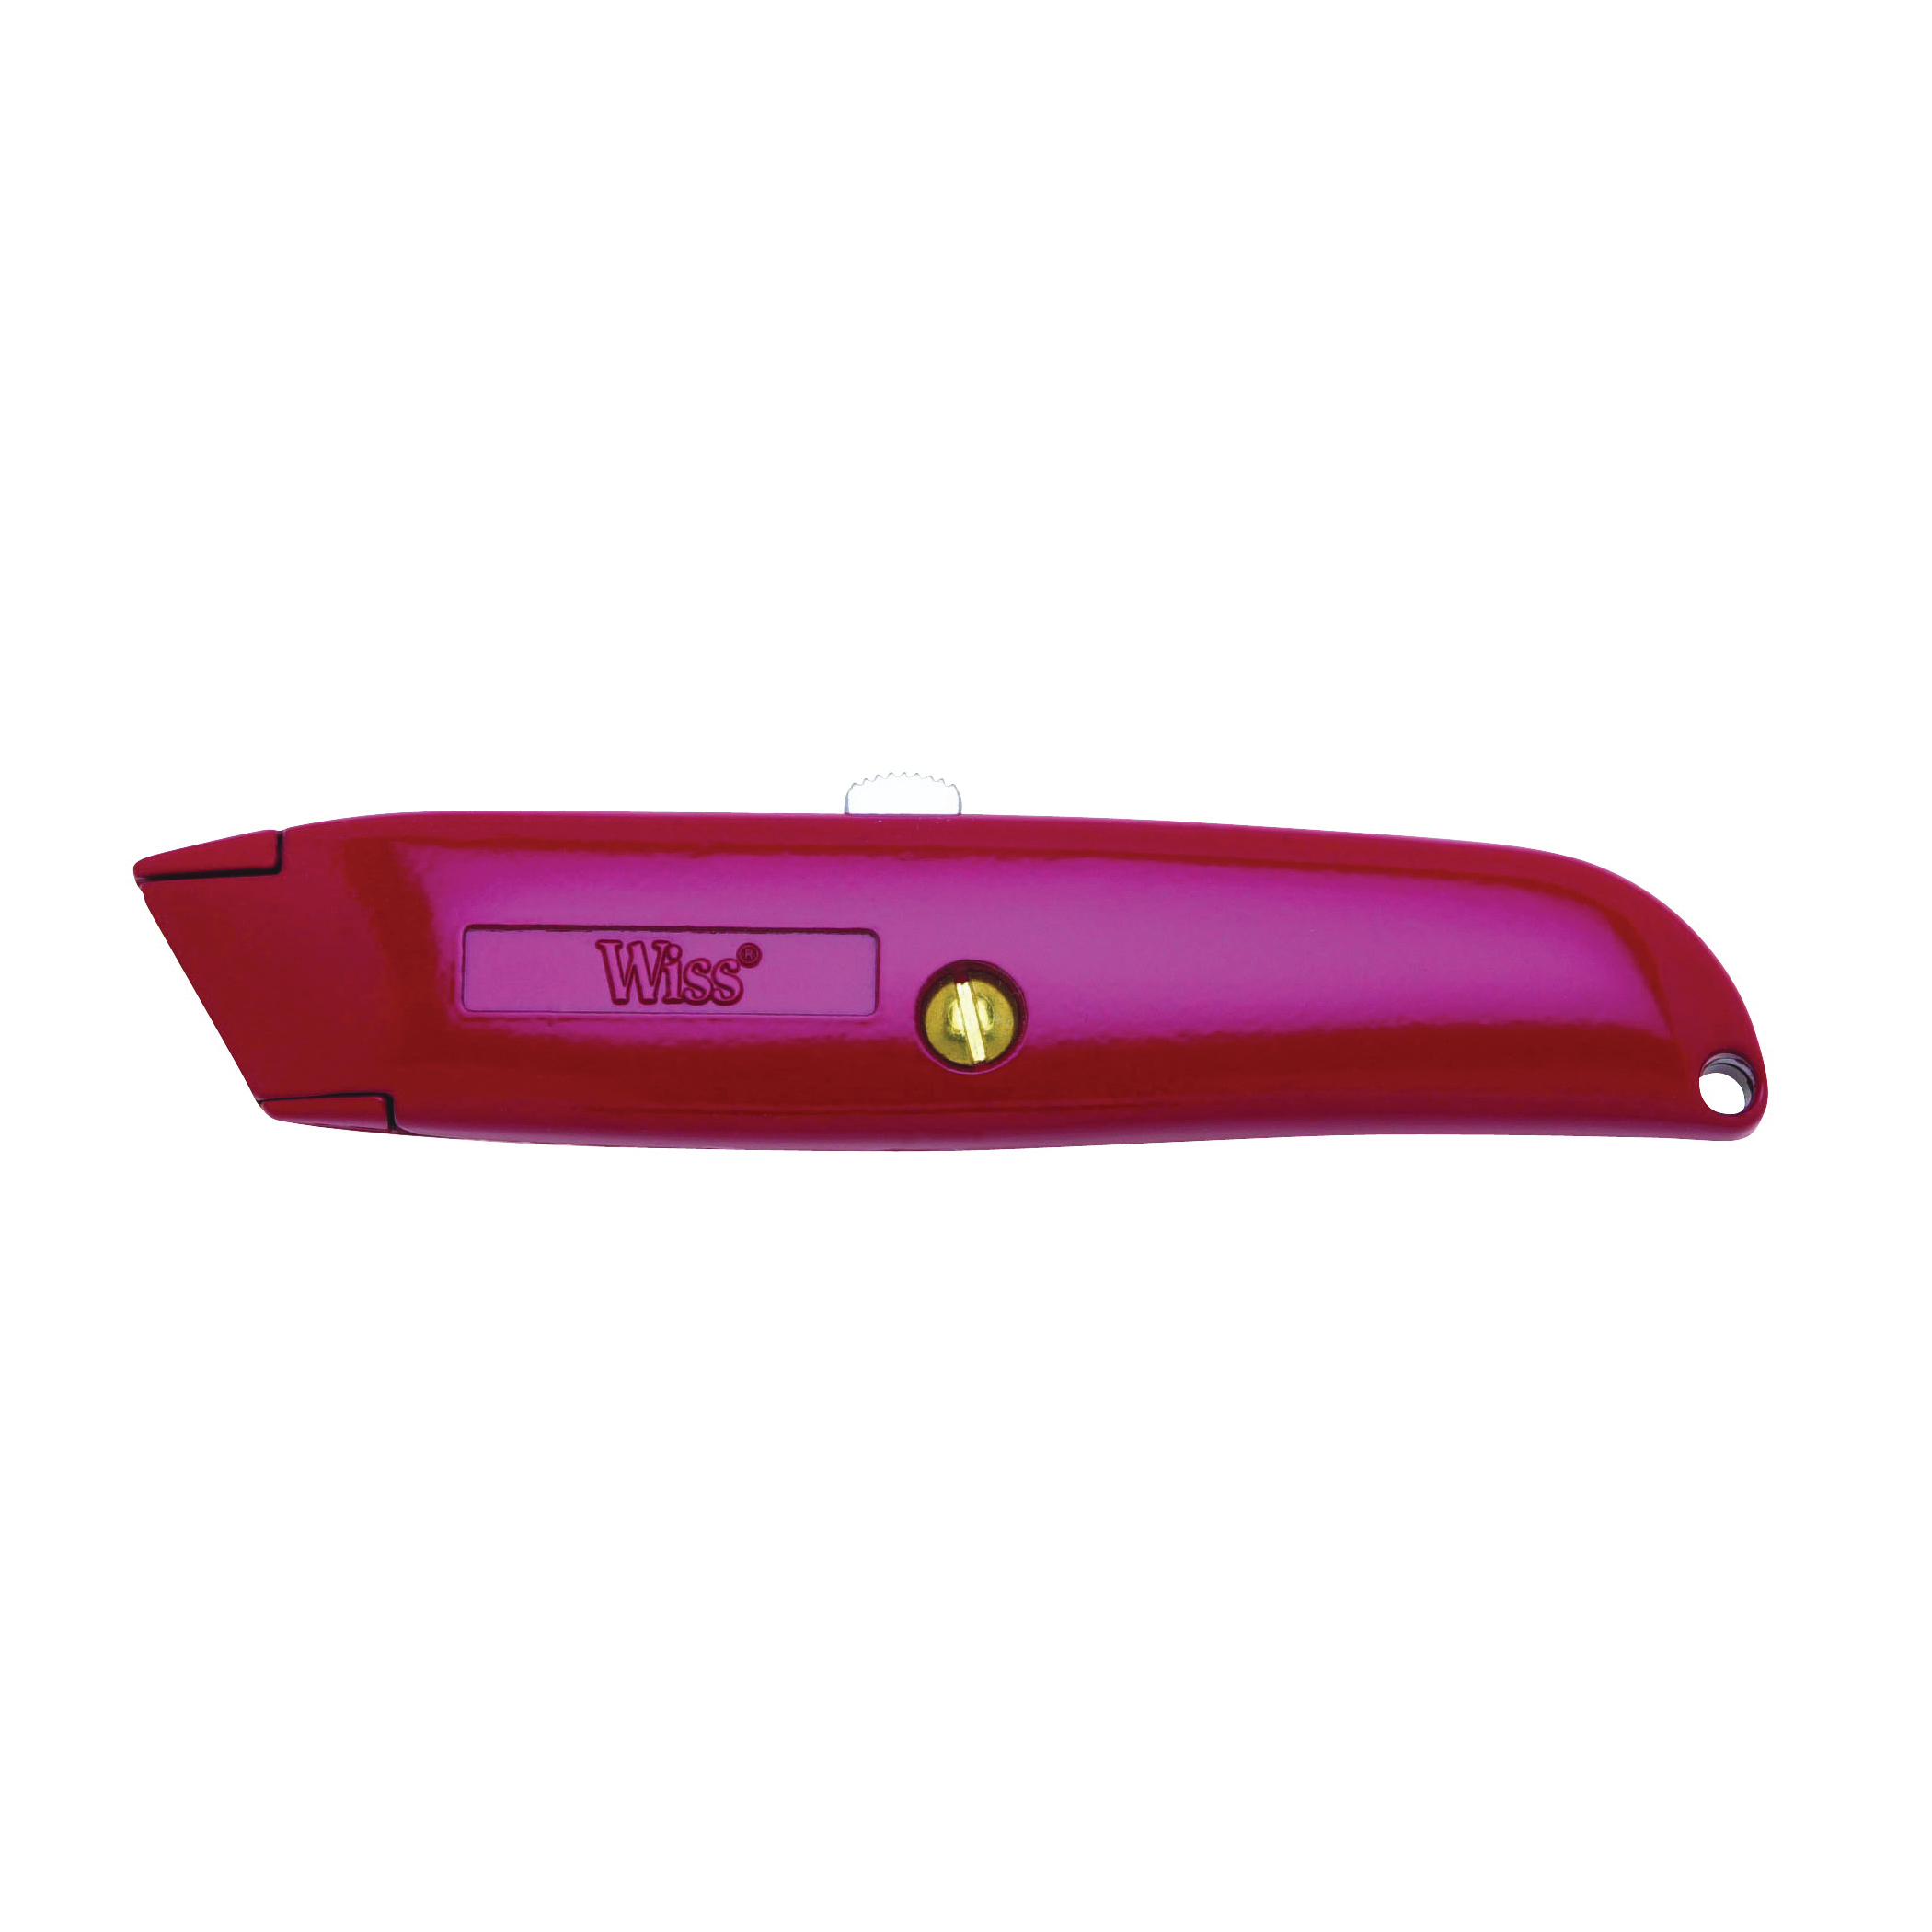 WK8V Utility Knife with Three Blade, Red Handle